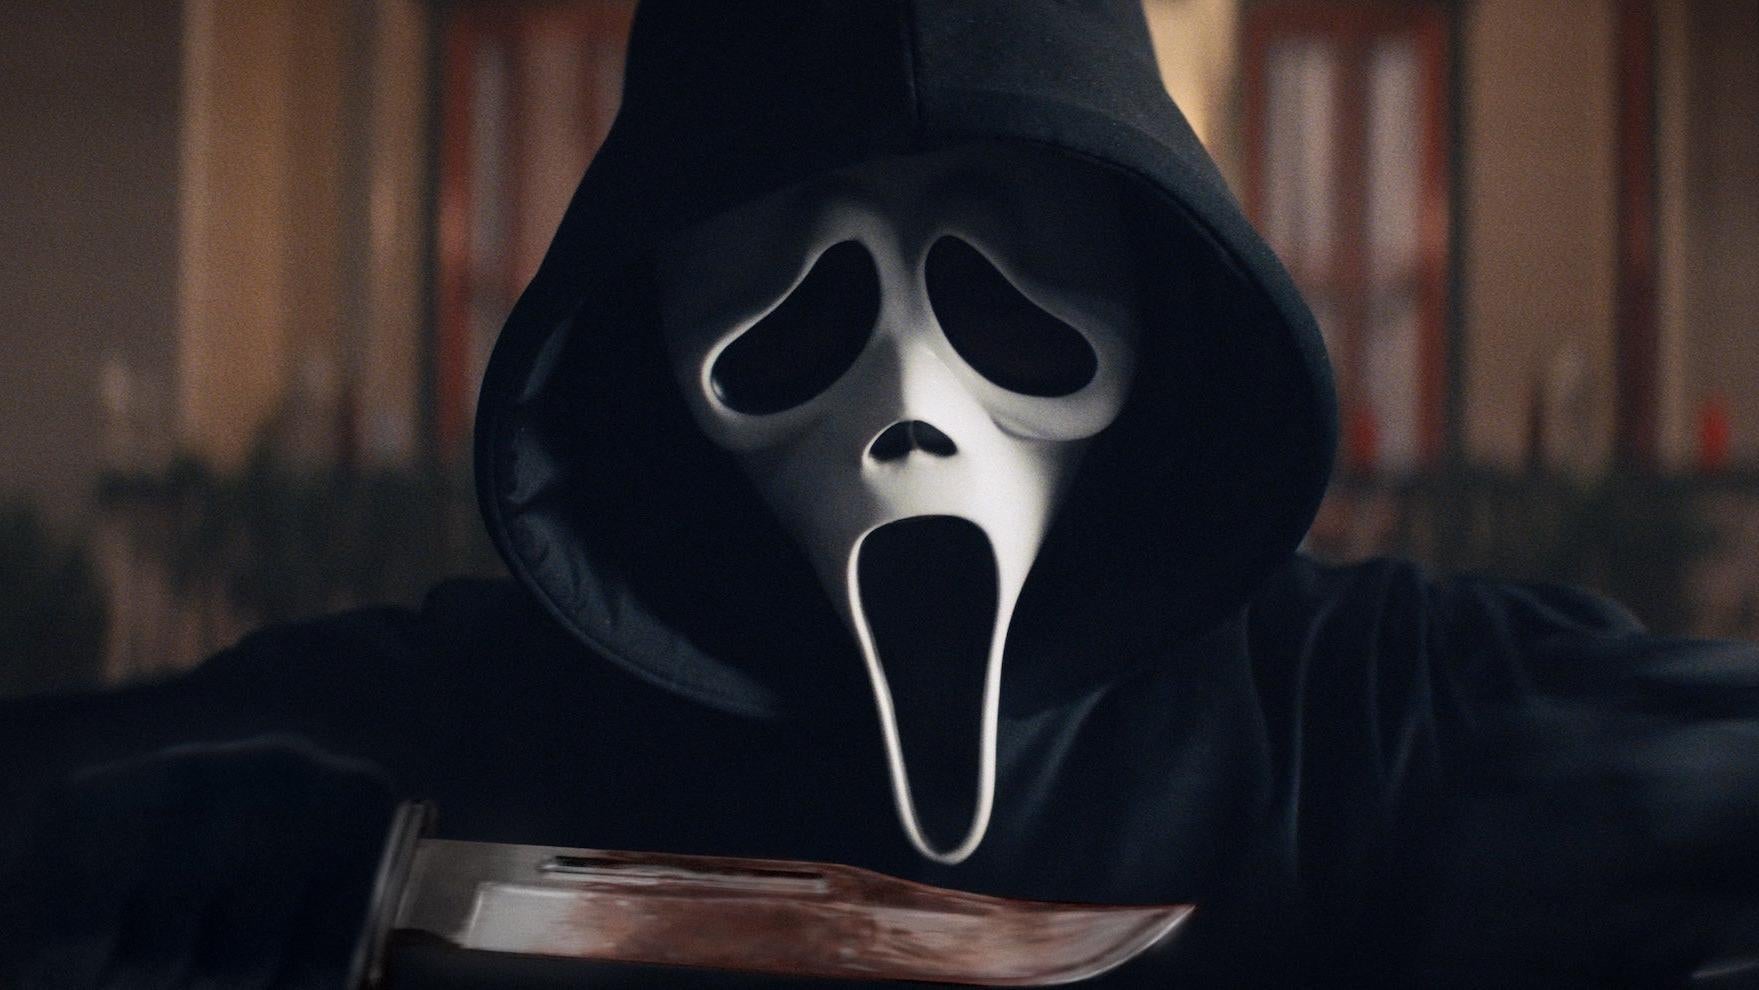 Scream 5 Directors Interview: Stab 8, Spoilers, and Covid-19